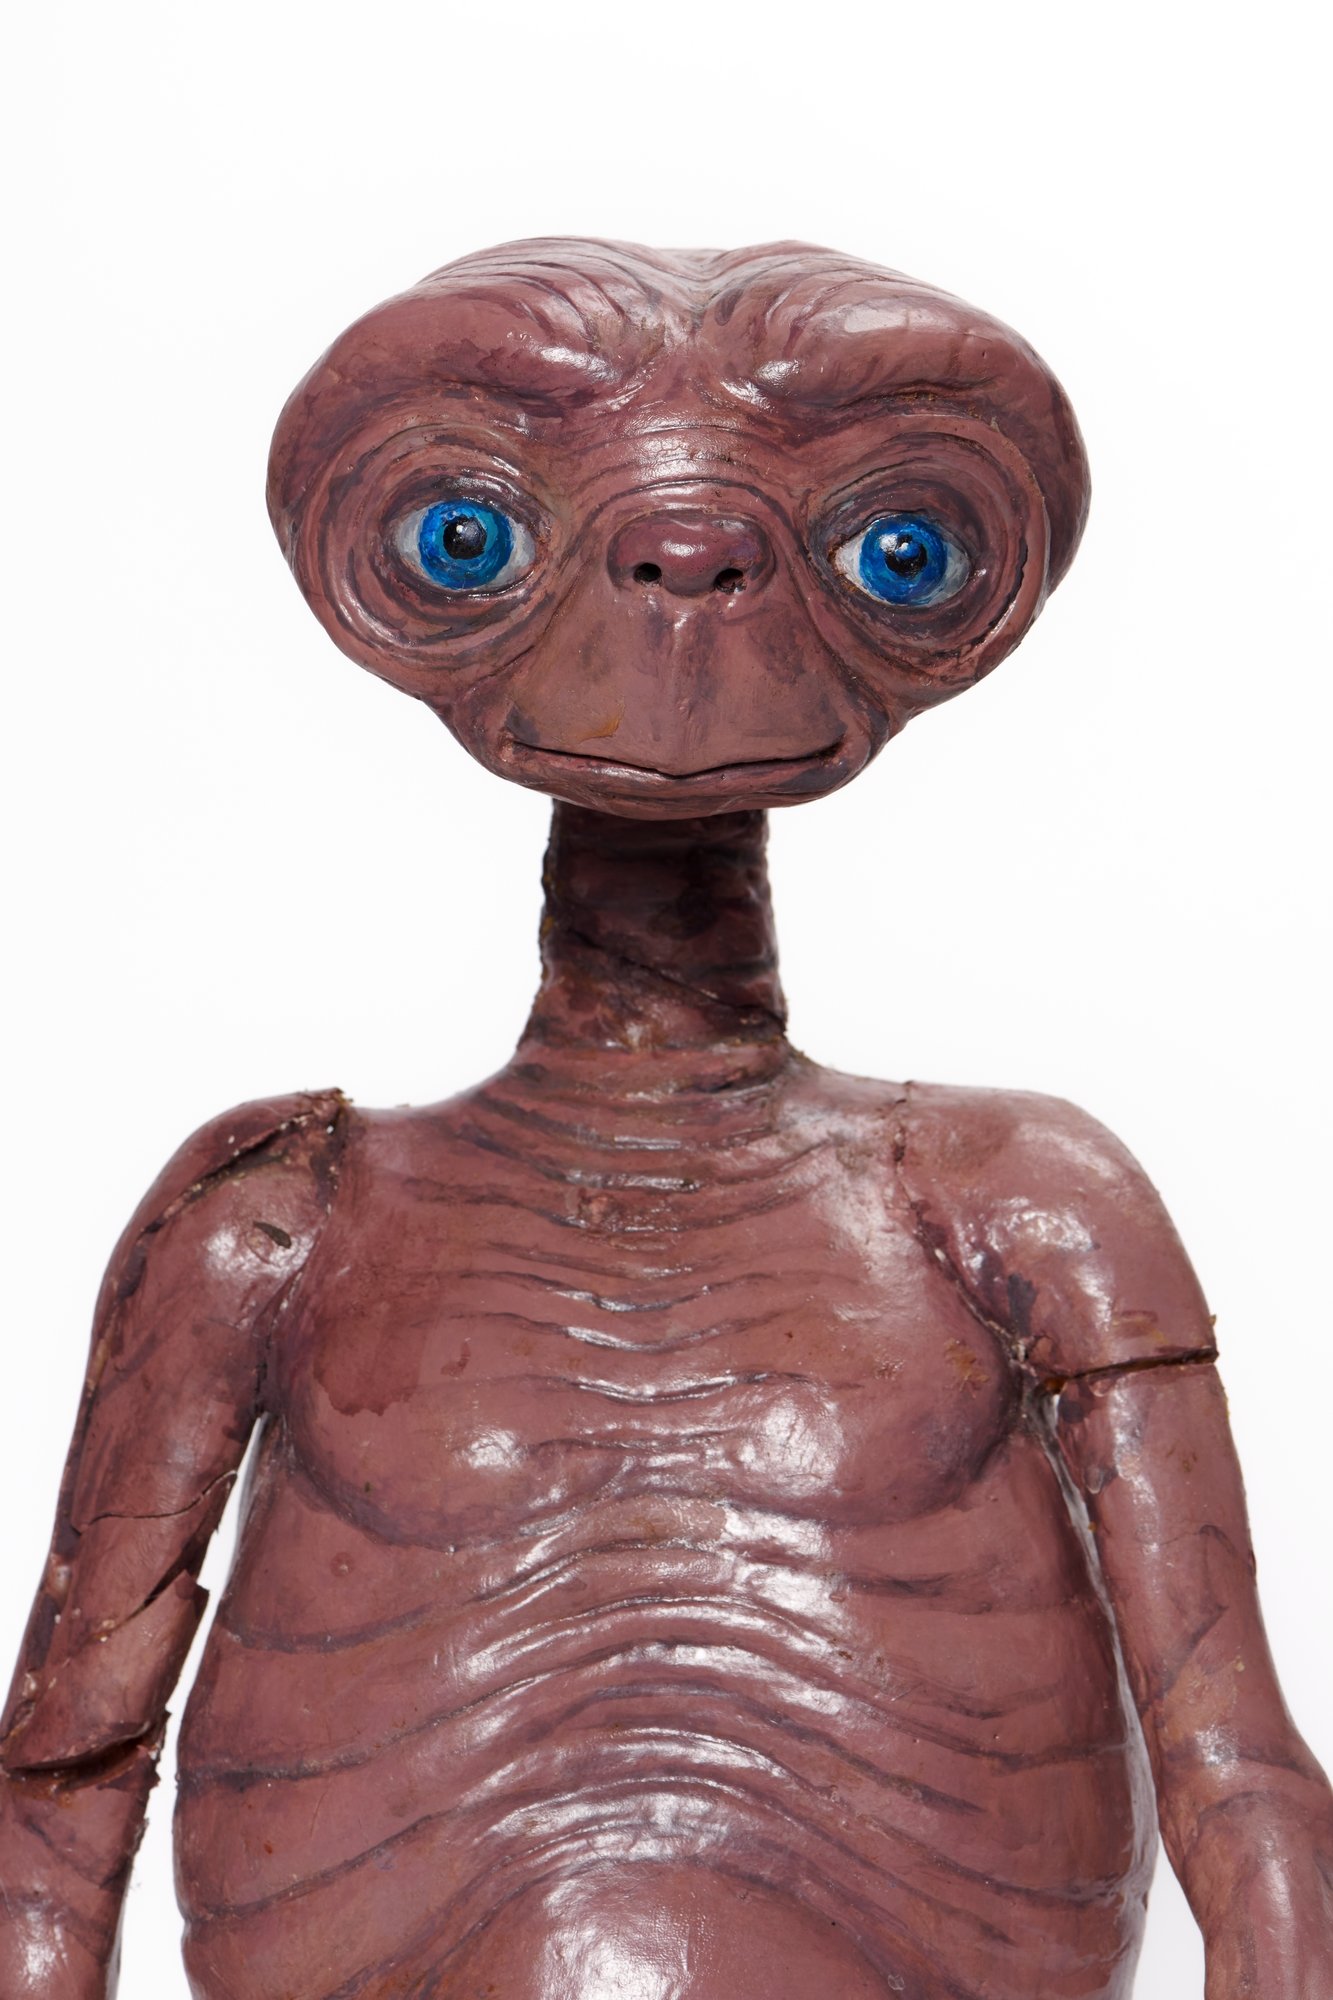 The Robotic Alien Figure That Starred in 'E.T.' Sold for an